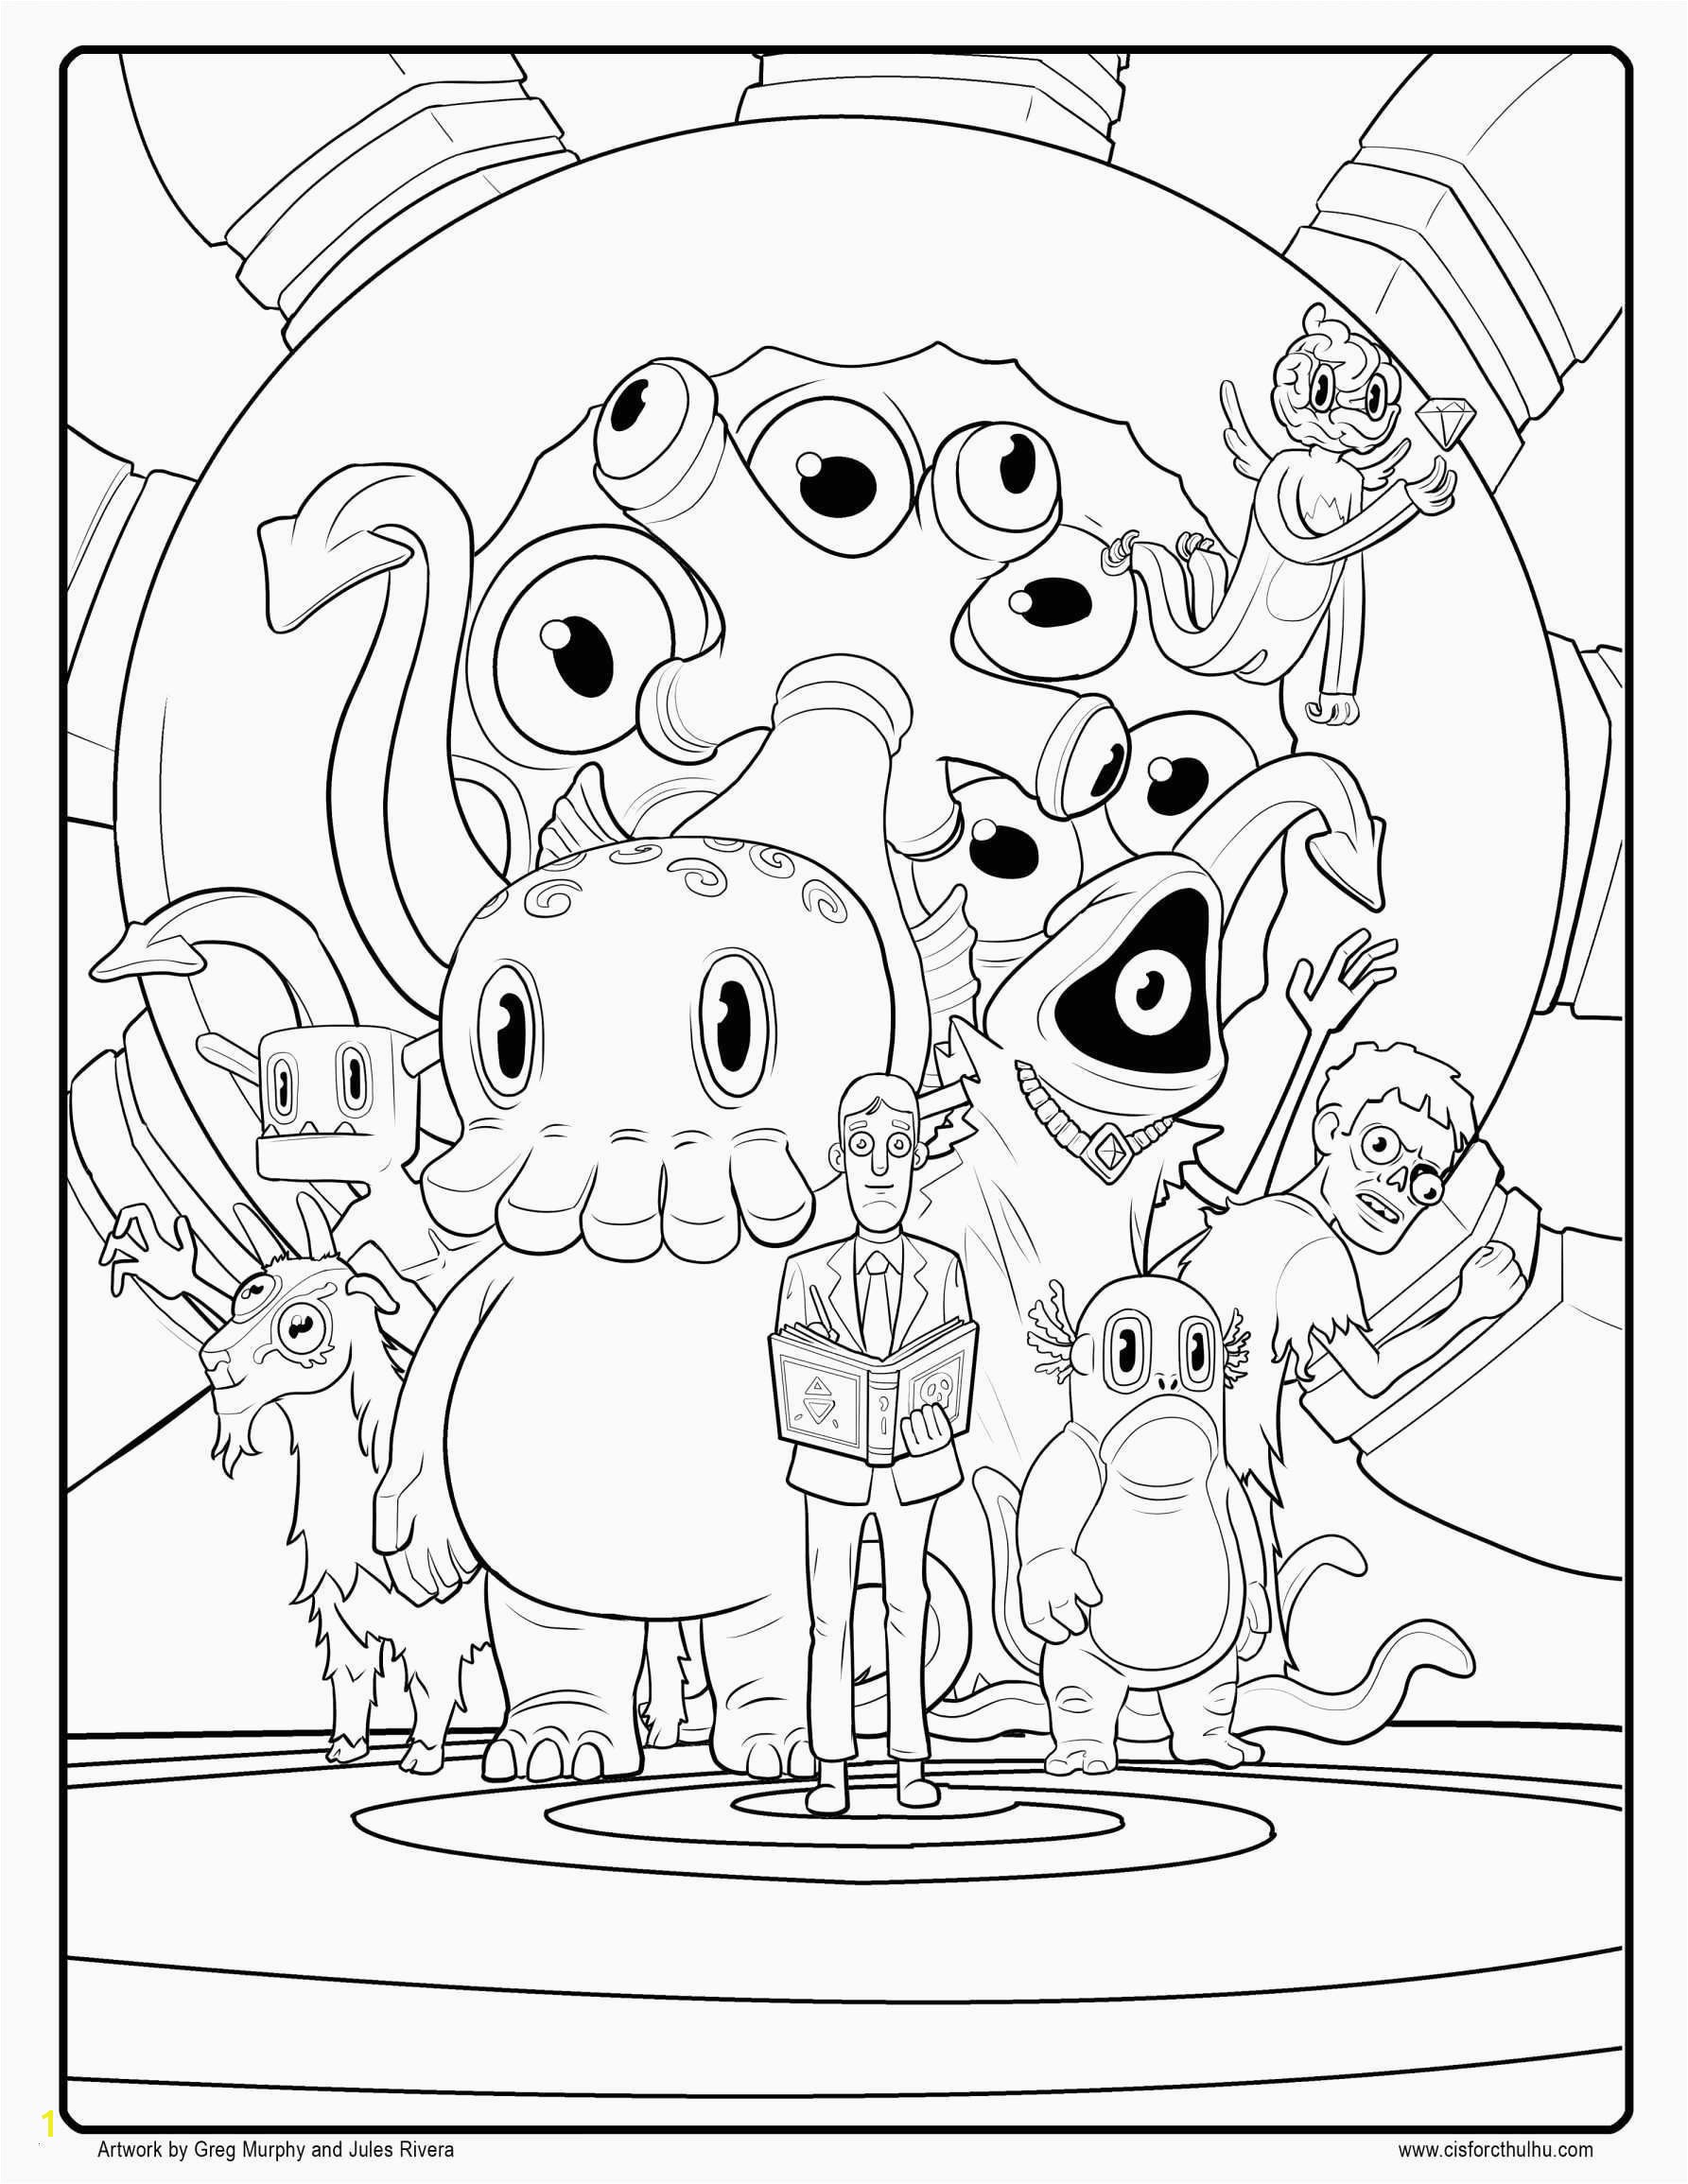 Christma Coloring Pages 33 Christmas Color Pages